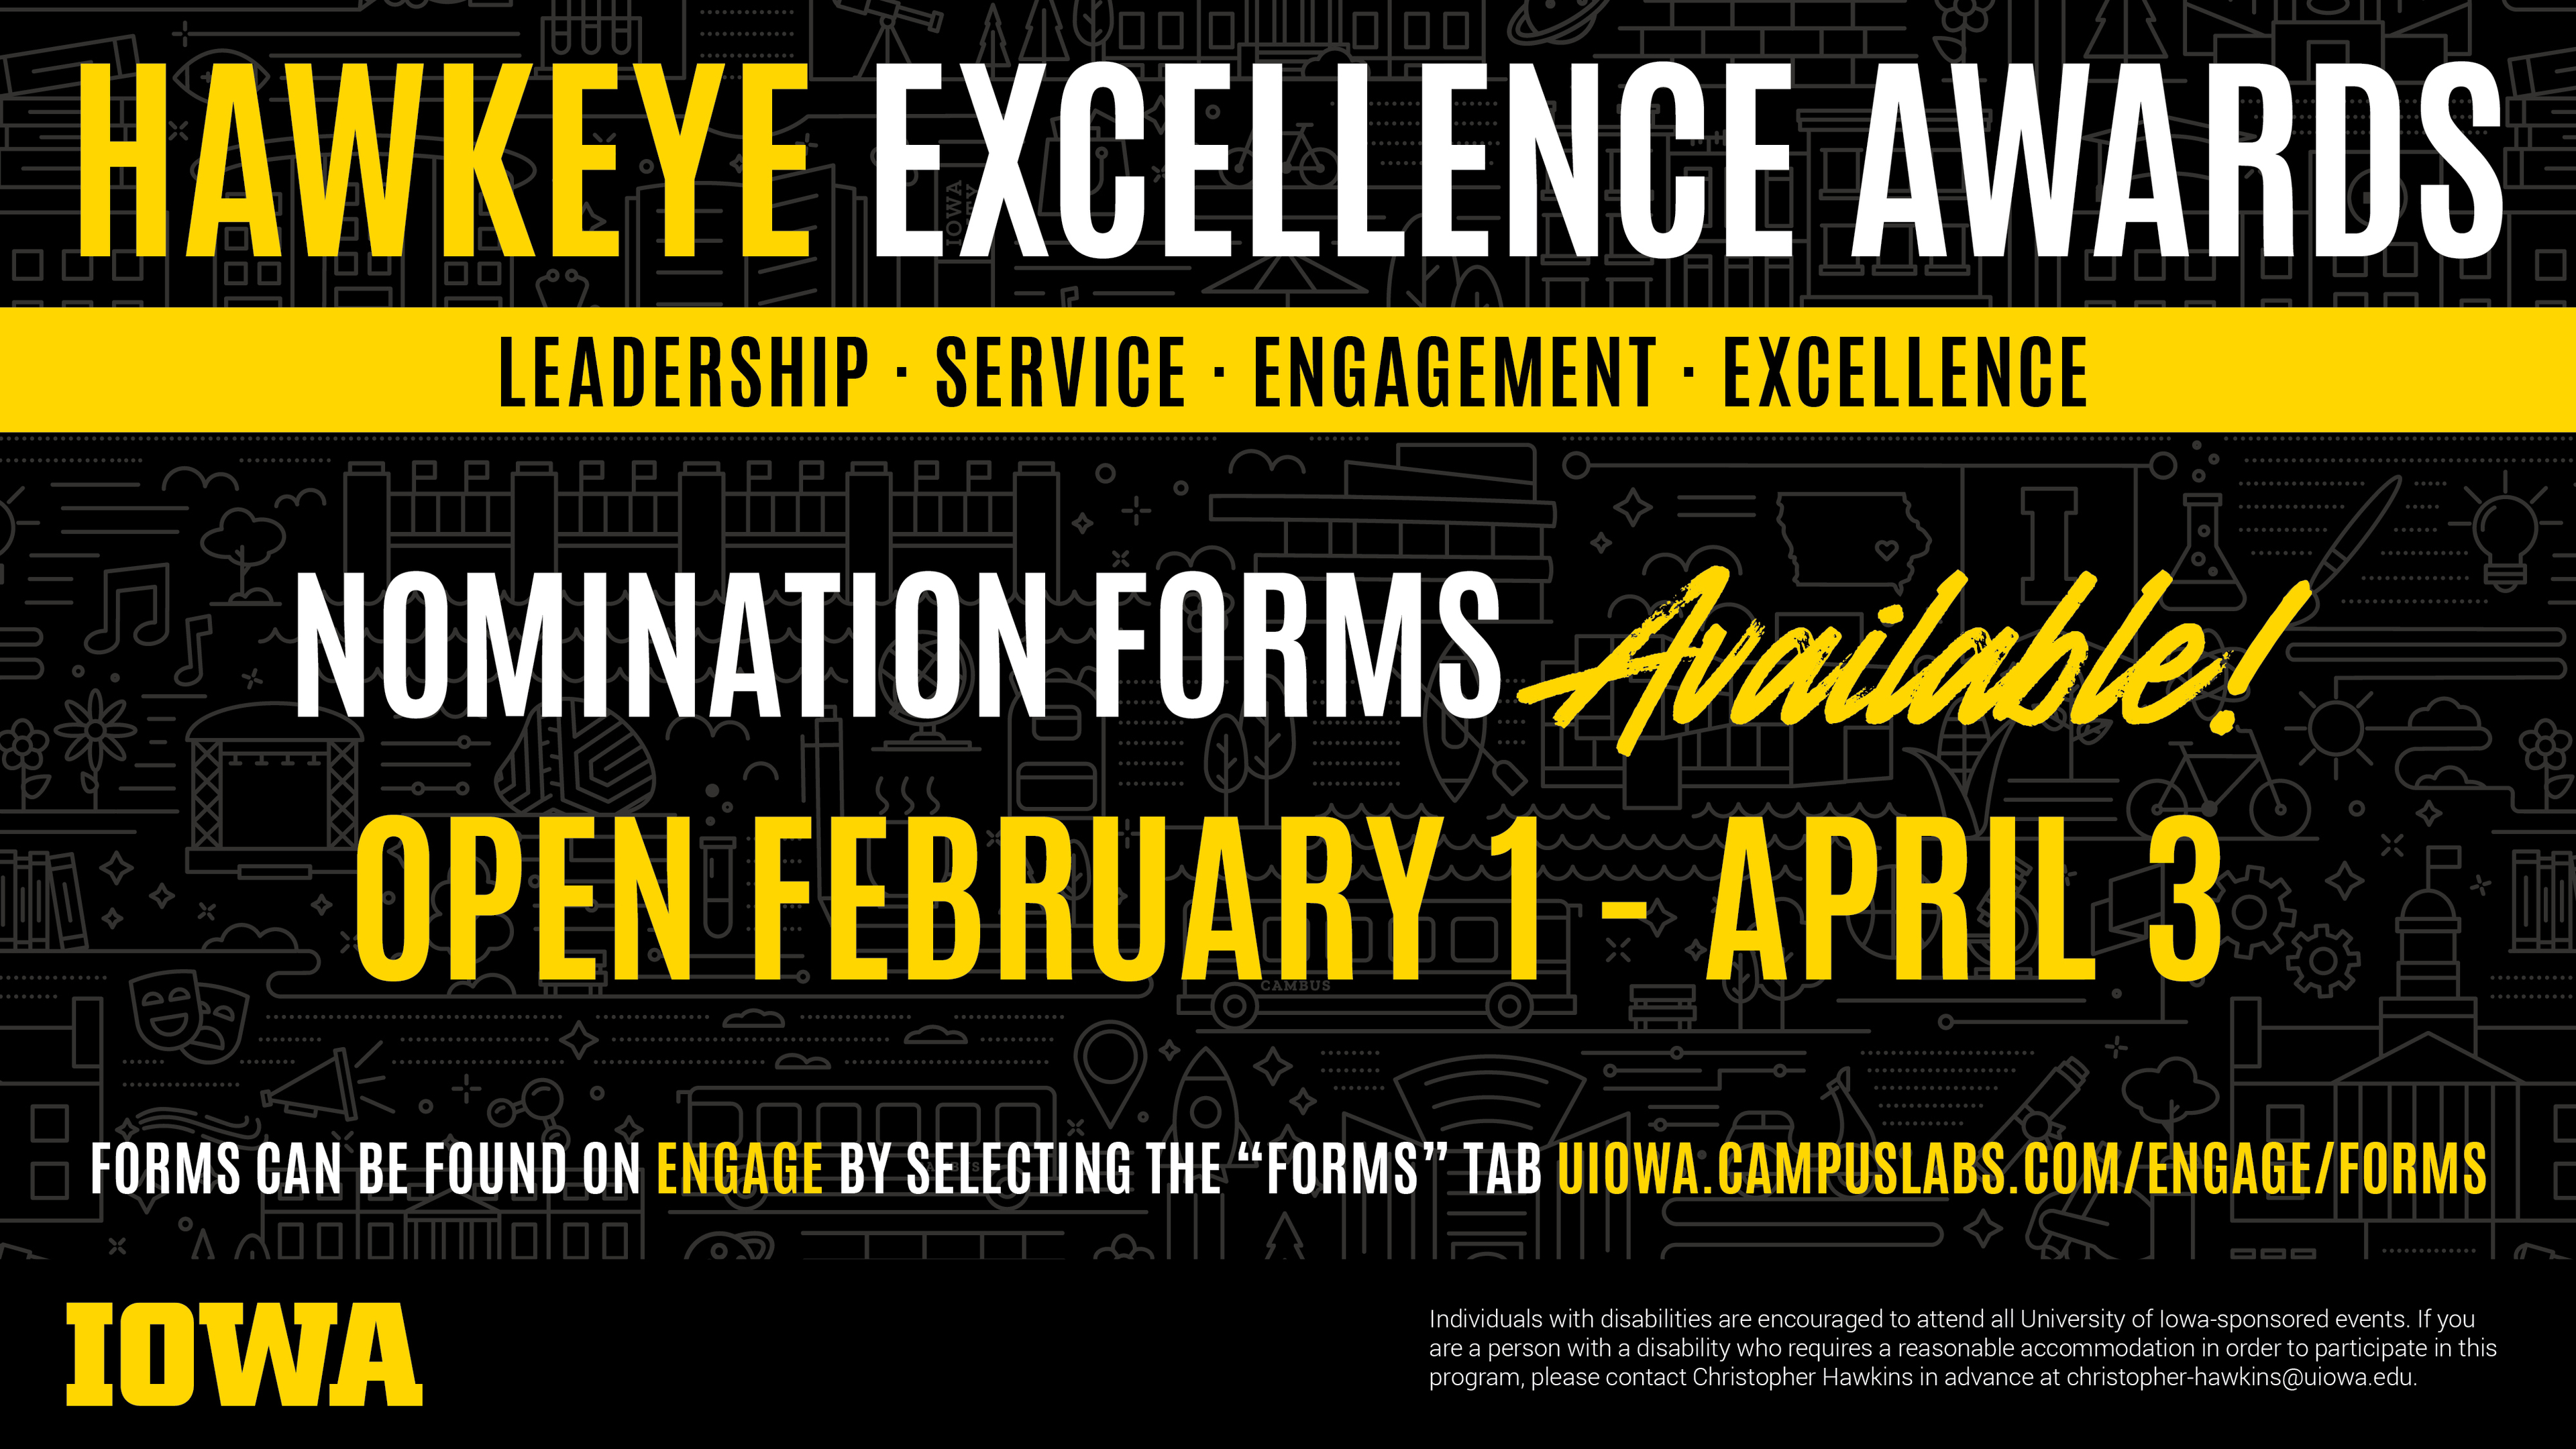 Hawkeye excellence award nominations open February 1 - April 3